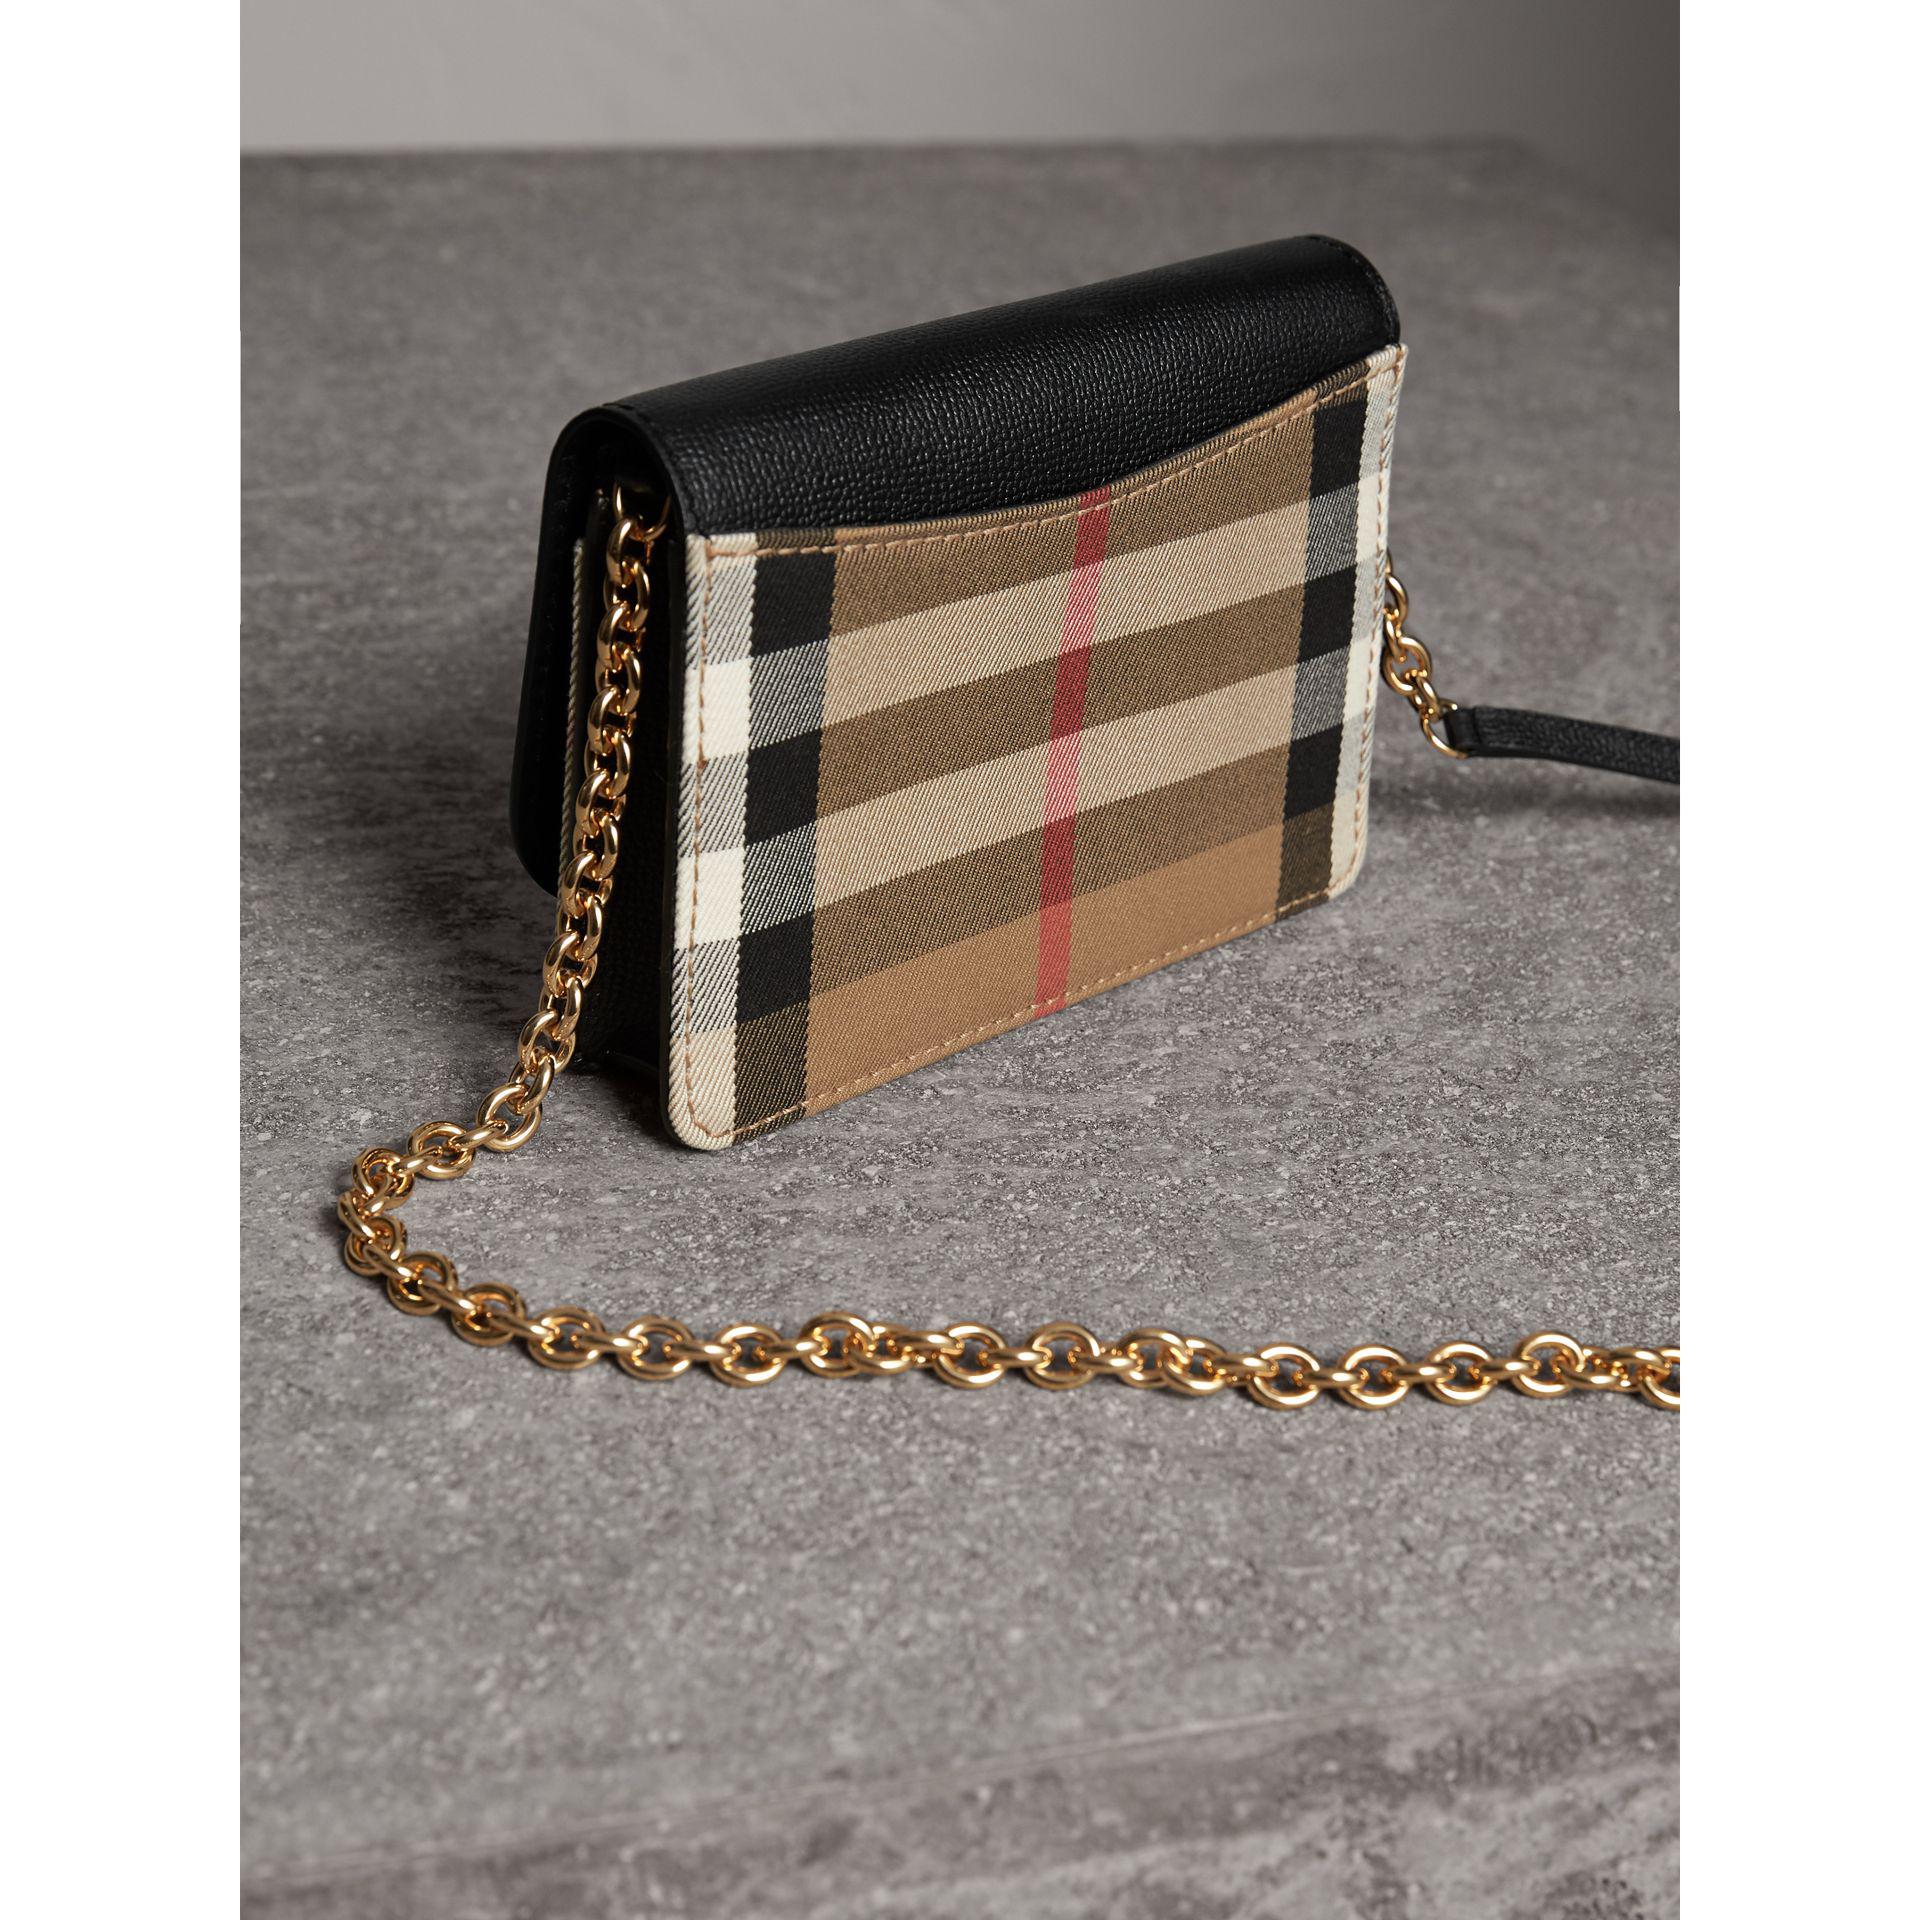 Checkered Wallet with Wristlet Strap